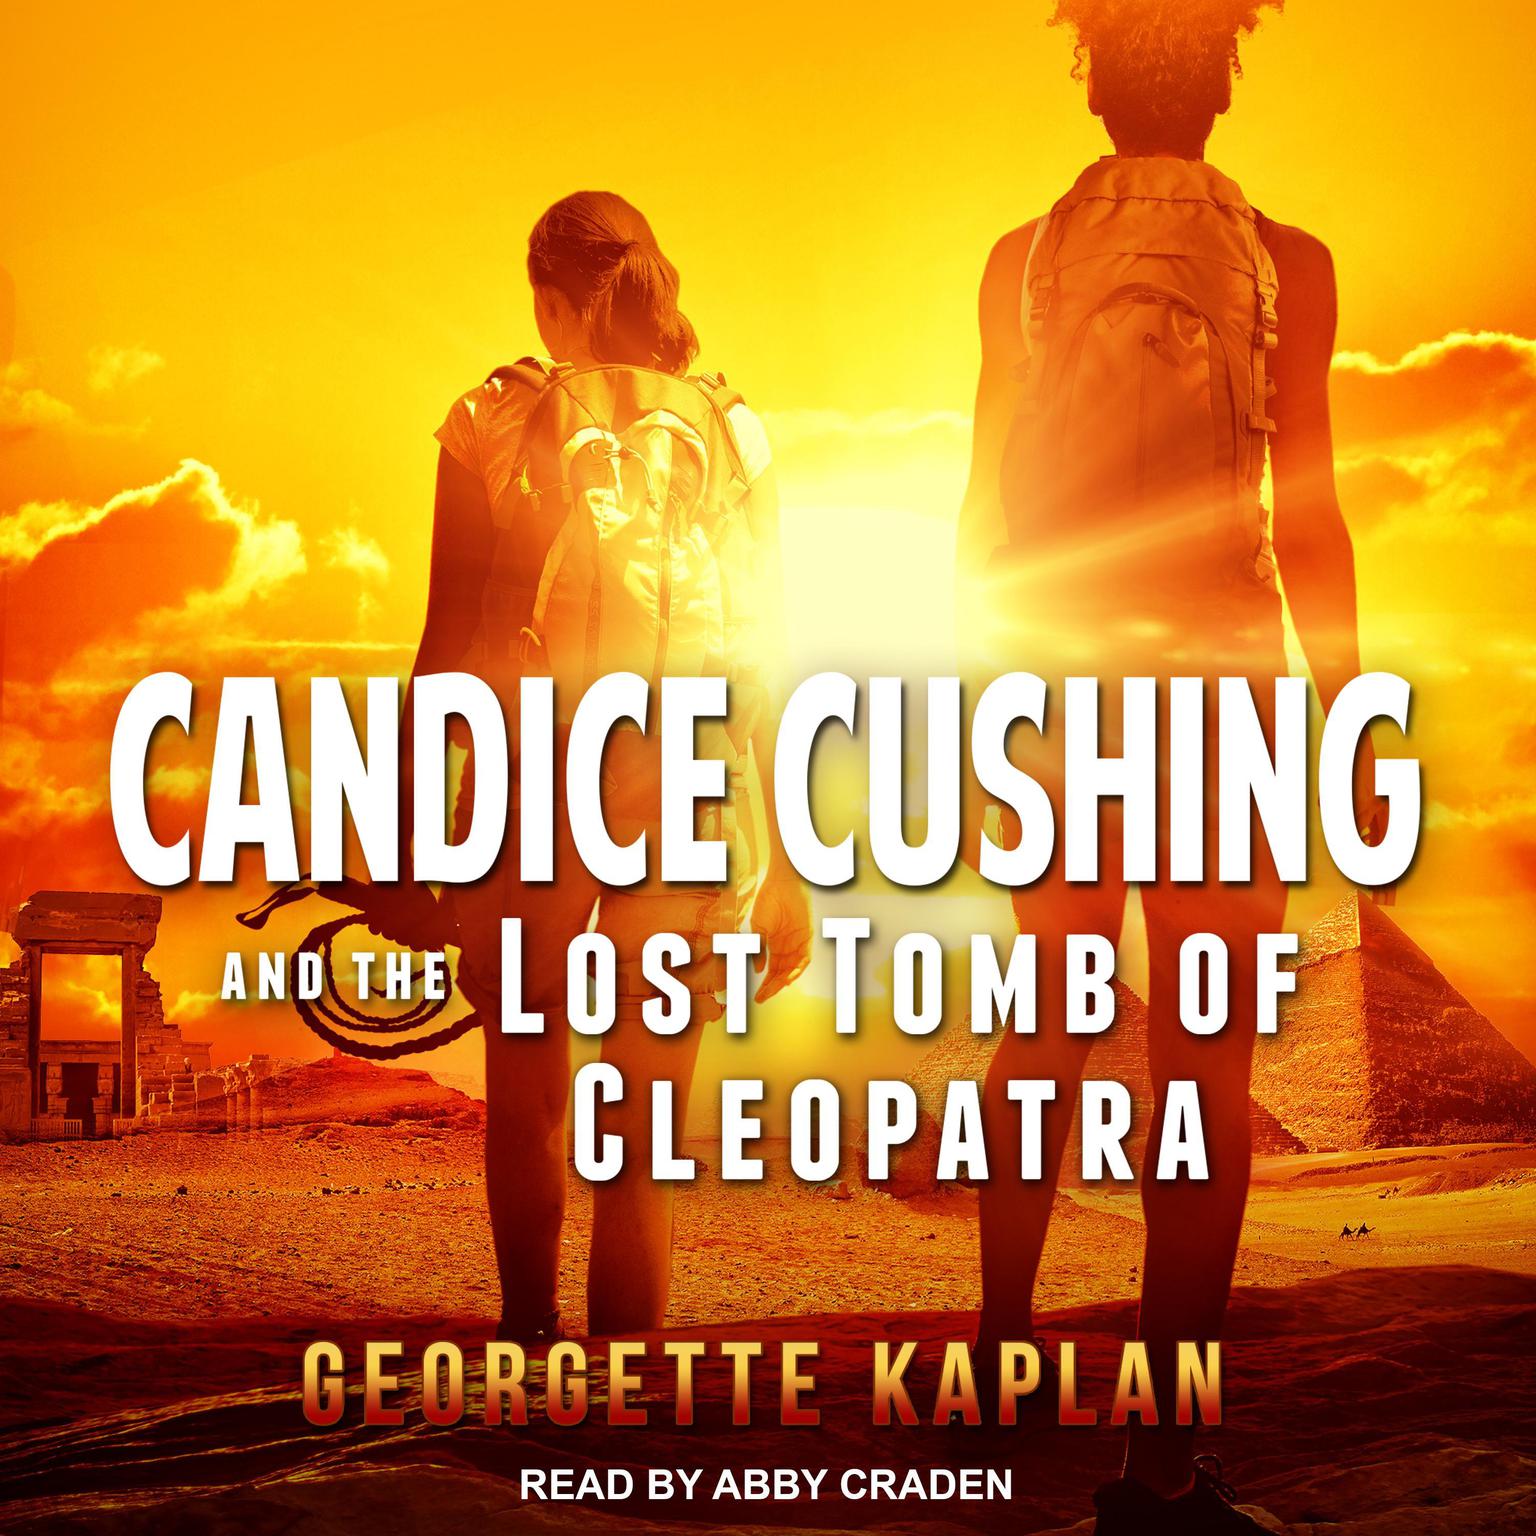 Georgette Kaplan, Abby Craden: Candice Cushing and the Lost Tomb of Cleopatra (AudiobookFormat, 2019, Ylva)